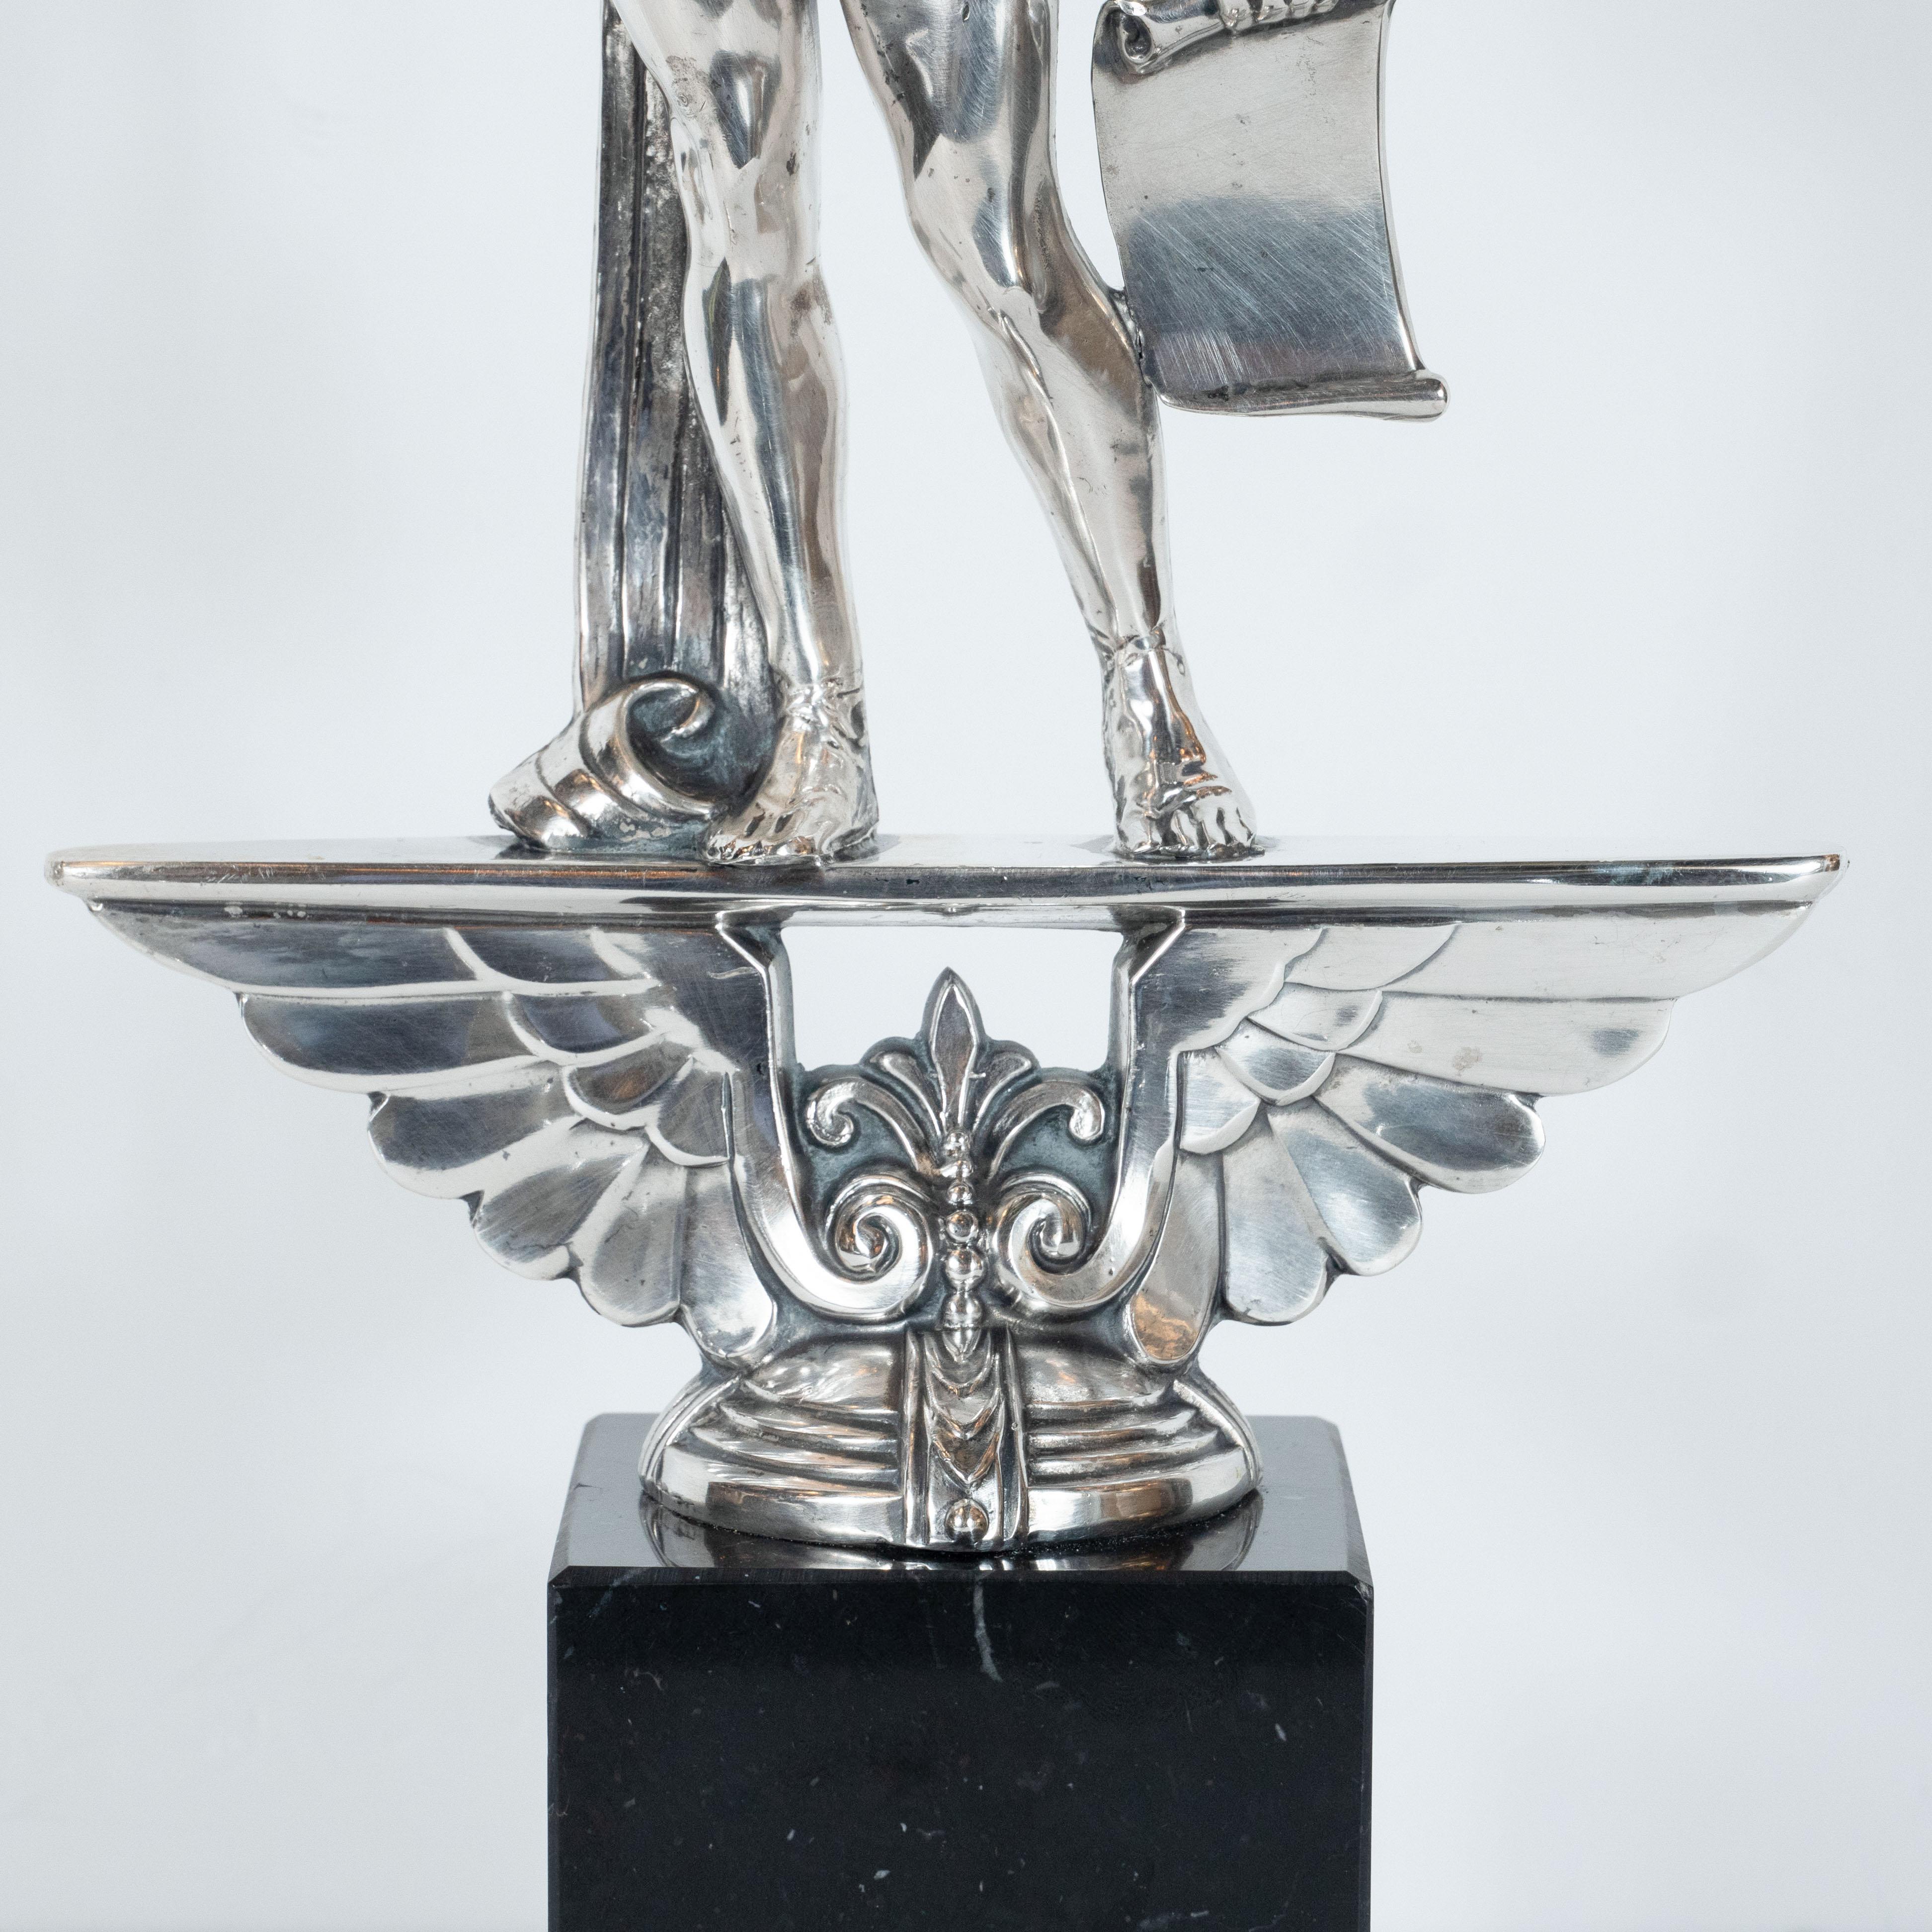 American Art Deco Classical Figurative Silvered Sculpture with Wing and Acanthus Motifs